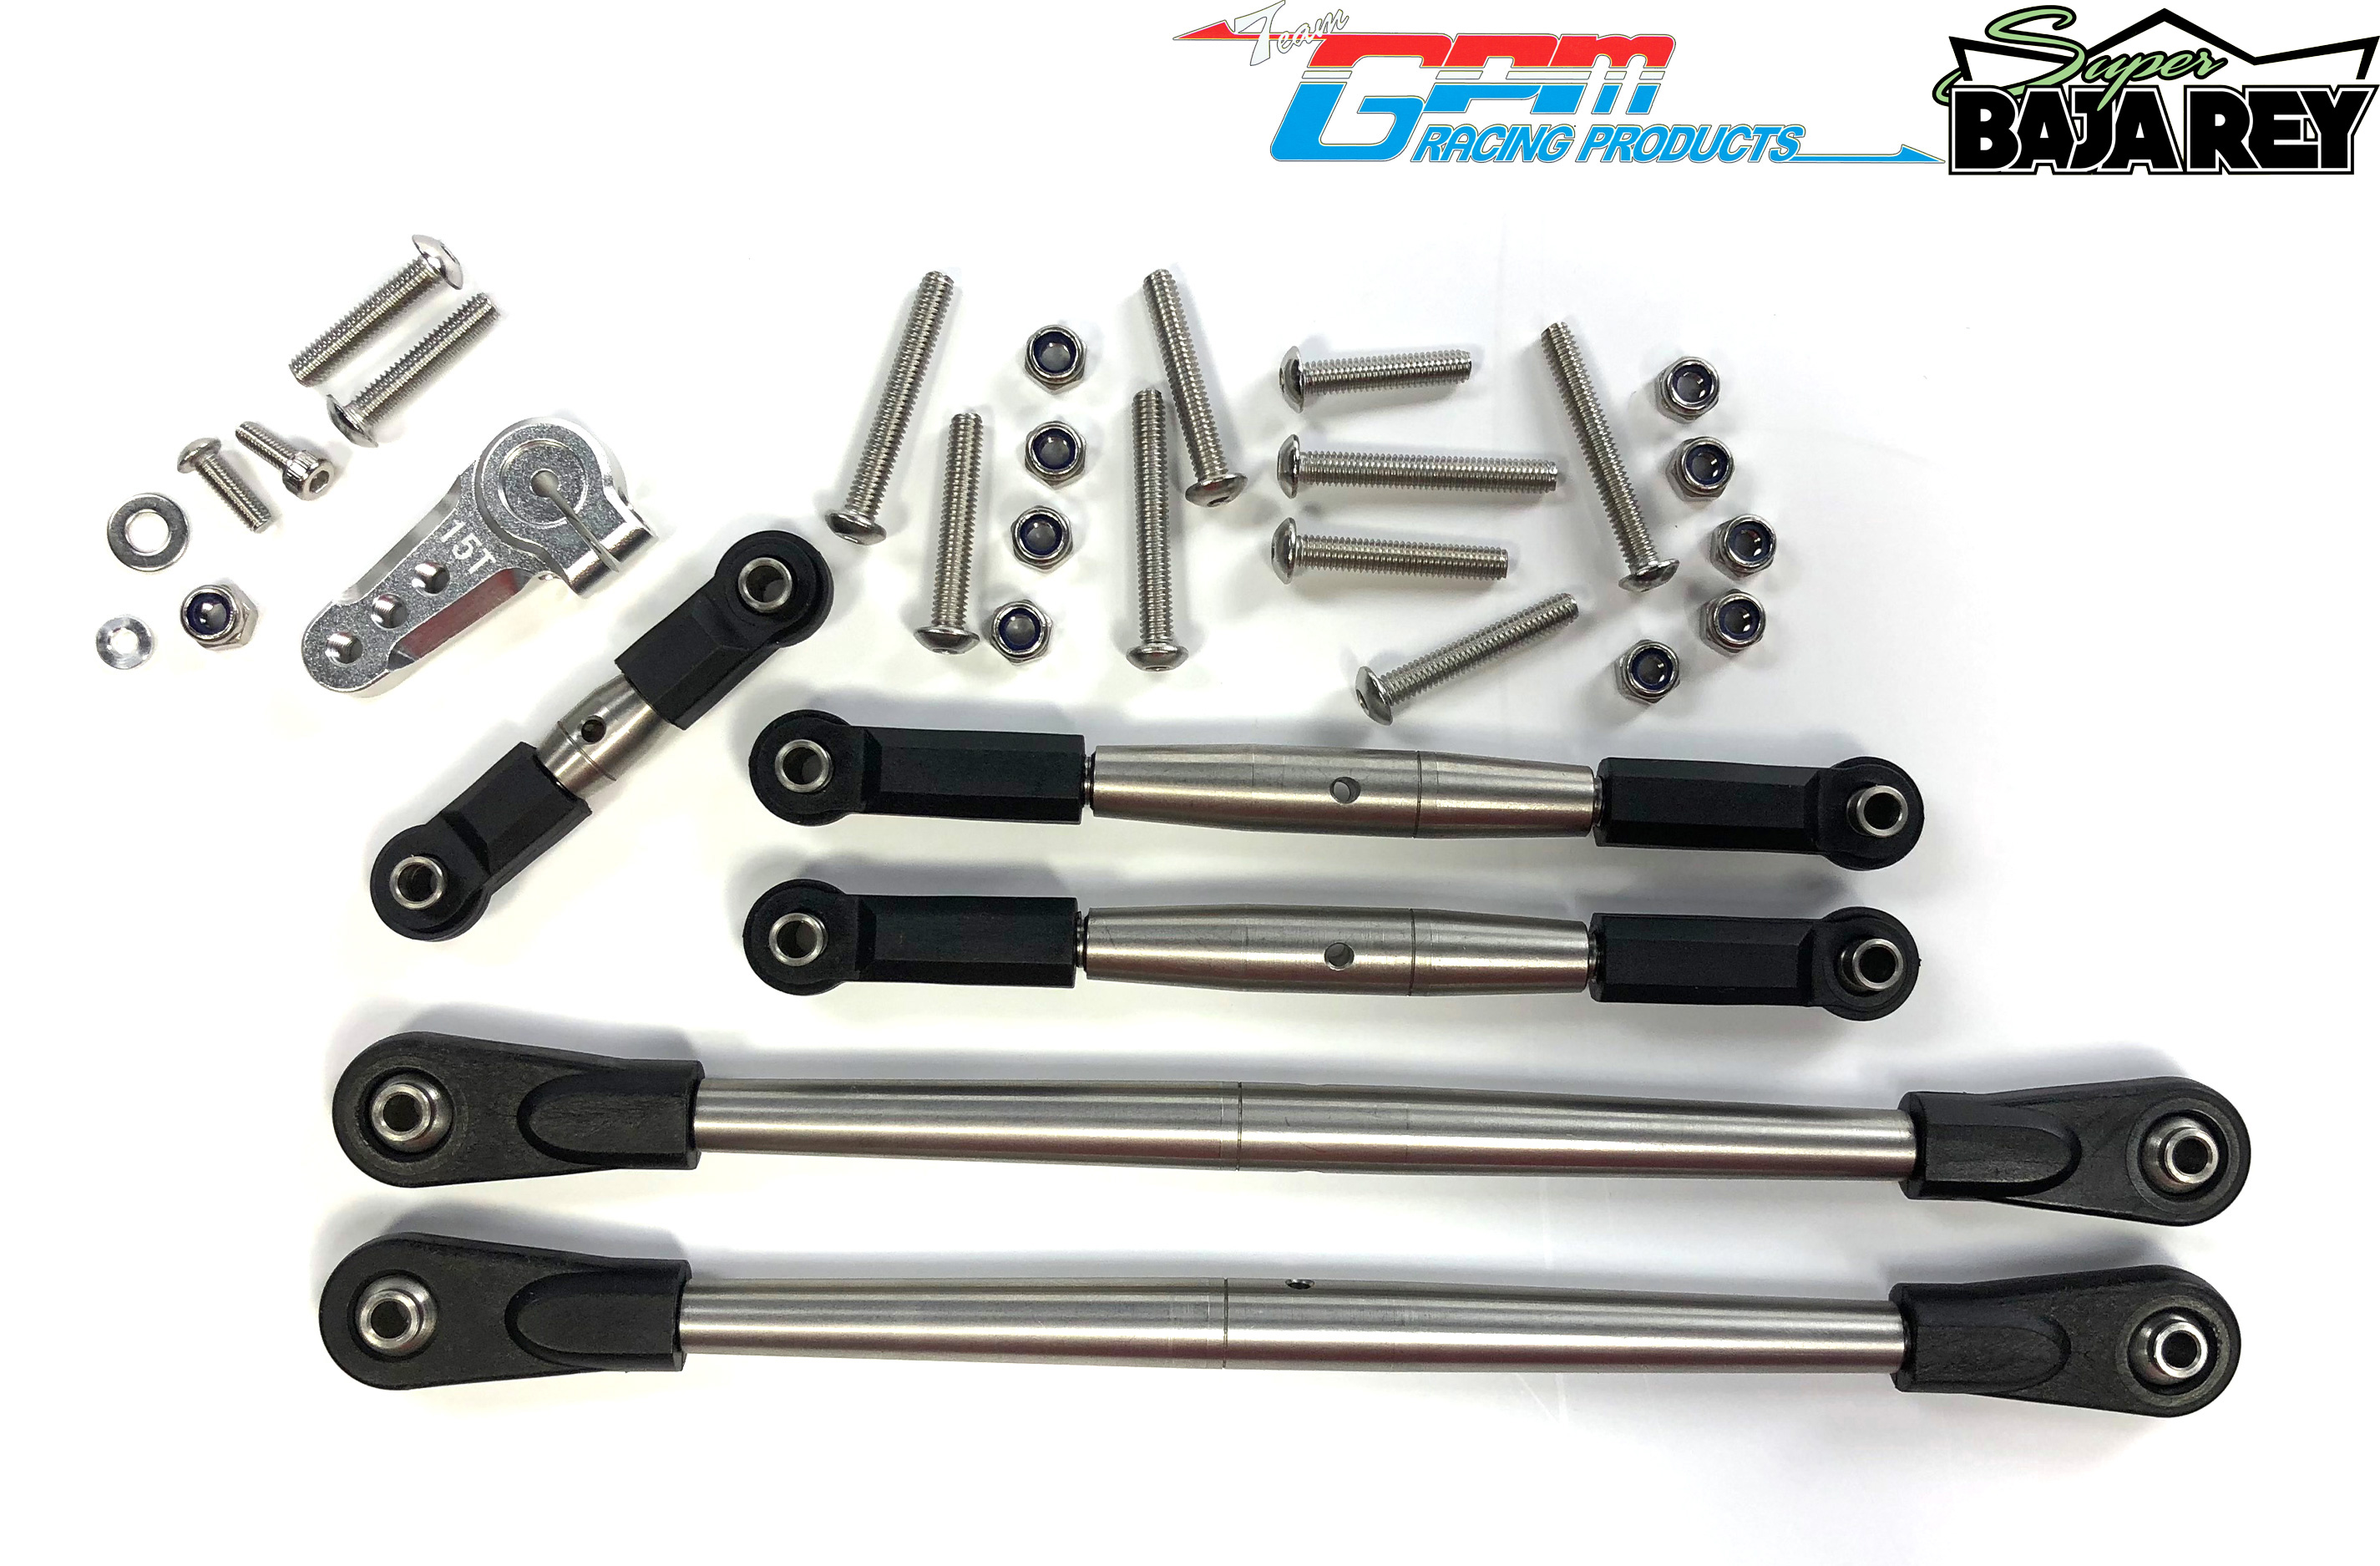 SSB160A GPM Stainless steel trailing arm and steering linkage set for Losi Super Baja Rey